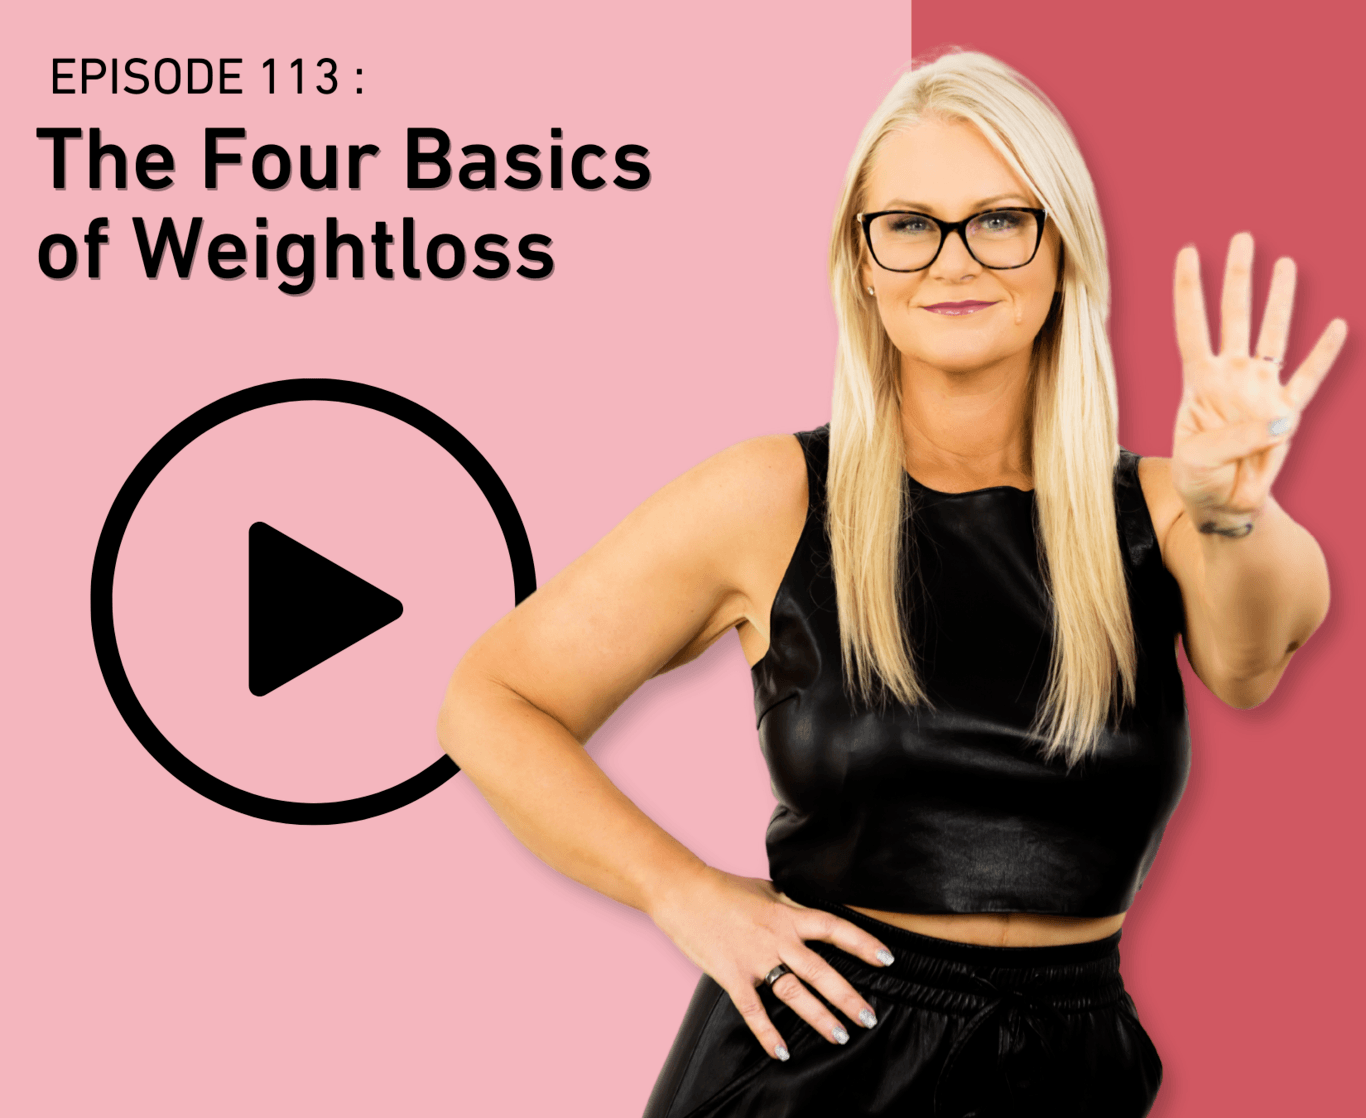 The four basics of weightloss.